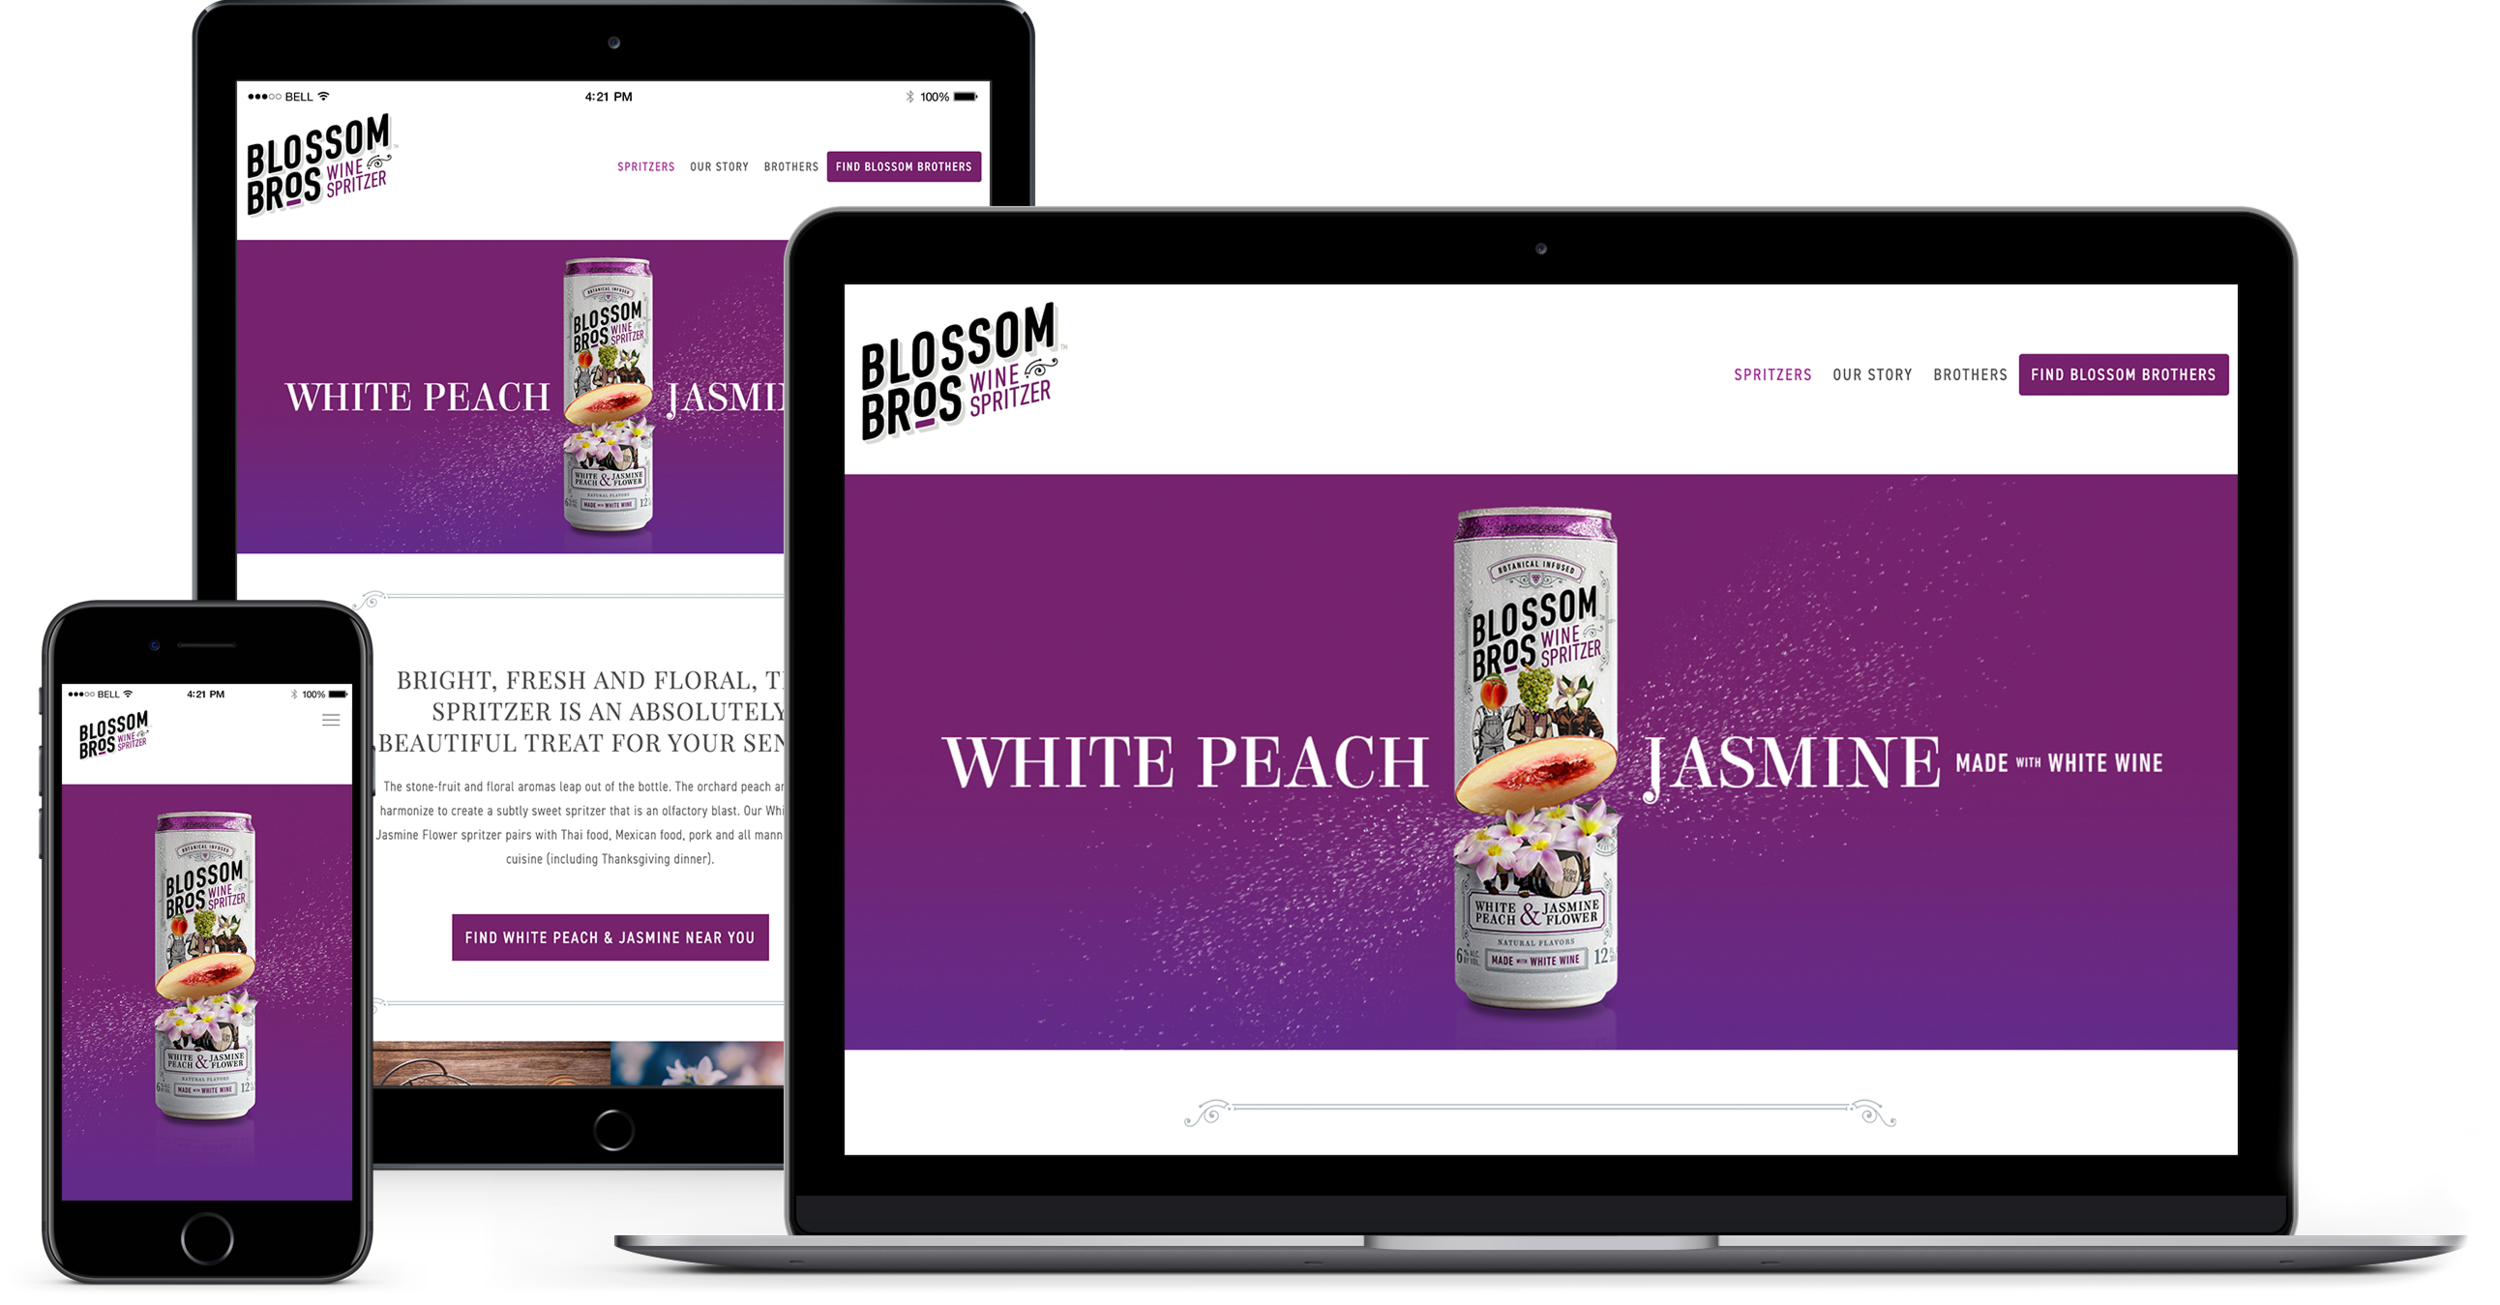 03 - Product Page - Peach Jasmine.png